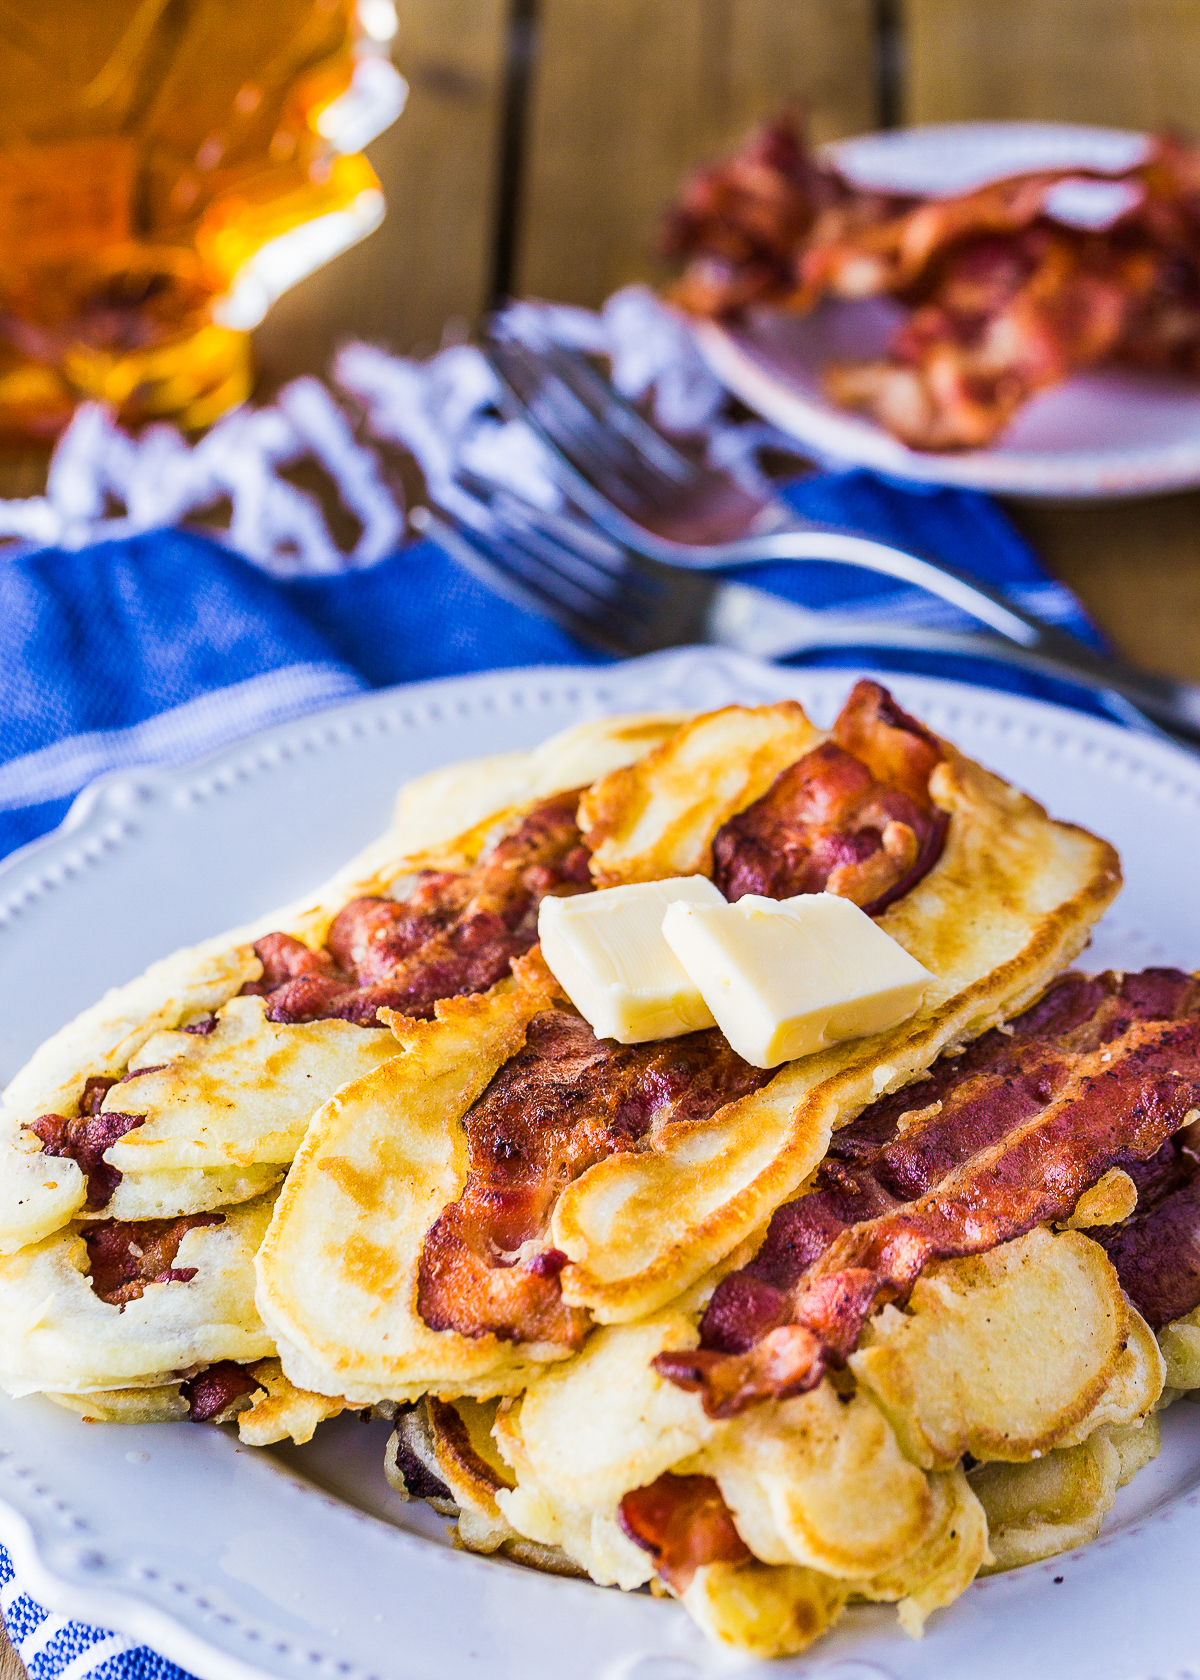 Fluffy, sweet and salty bacon pancakes. This bacon pancake recipe is great for breakfast on a lazy weekend for the family!